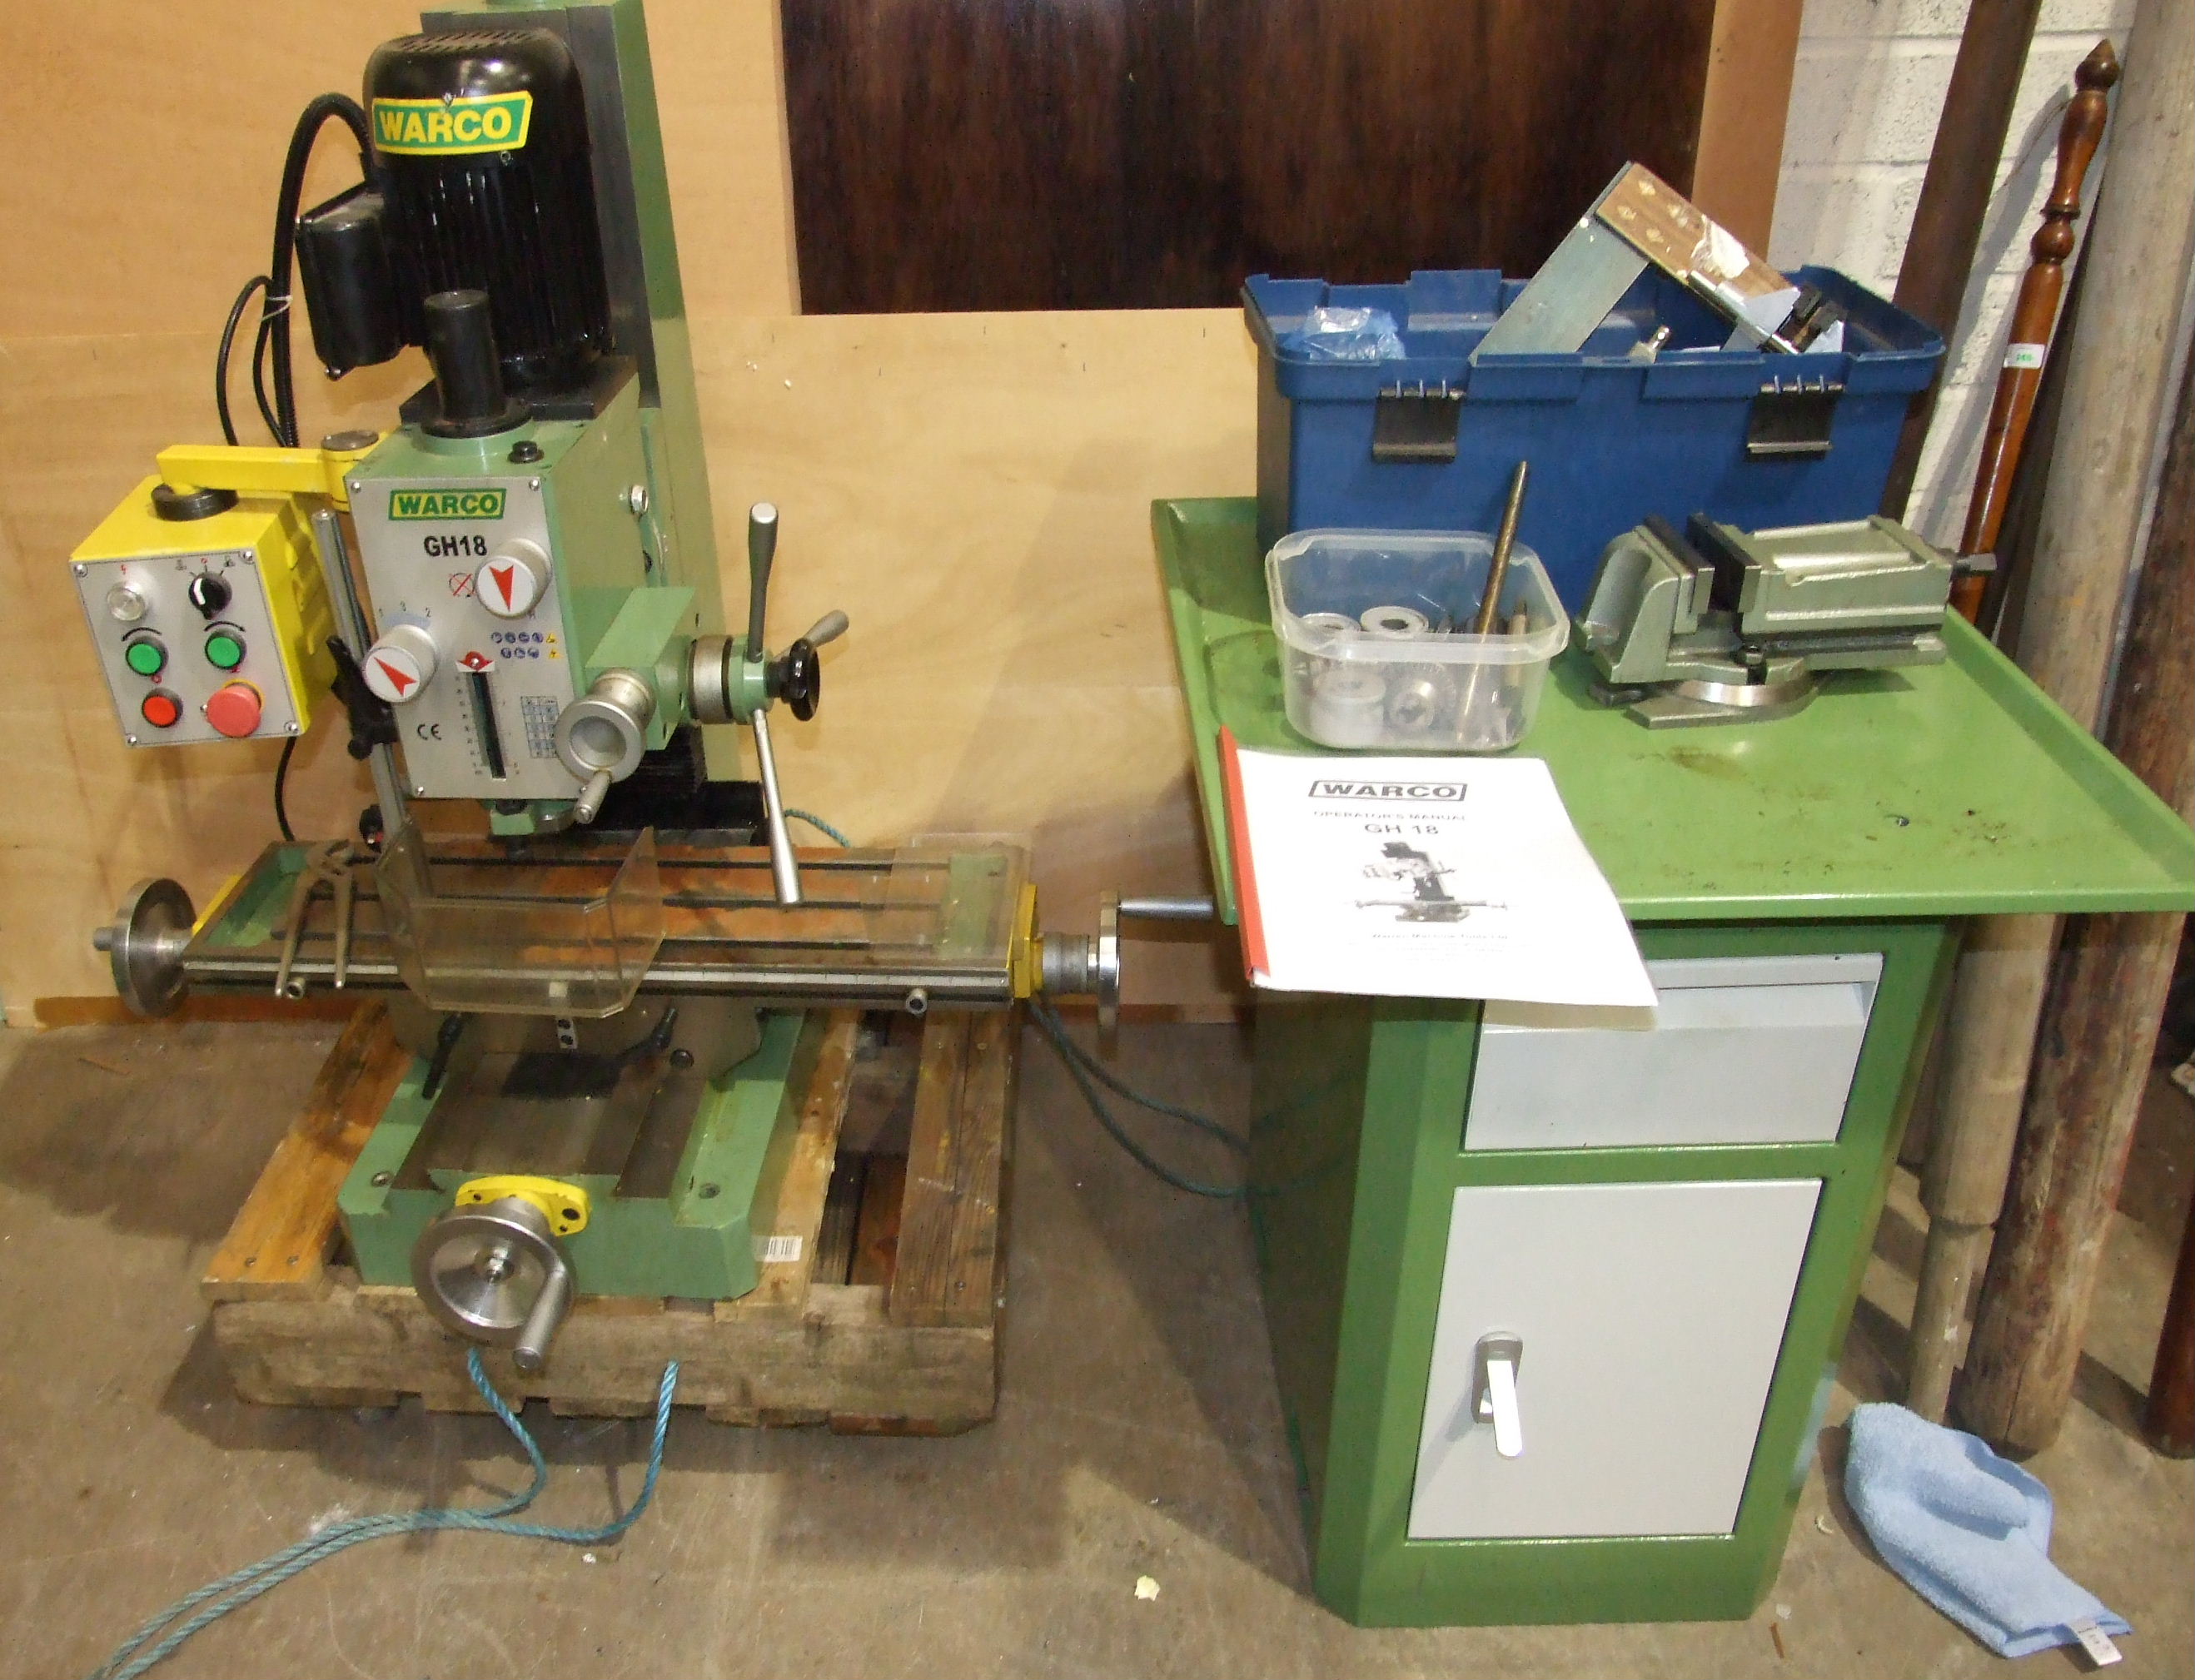 A Warco GH18 milling machine on single pillar stand.